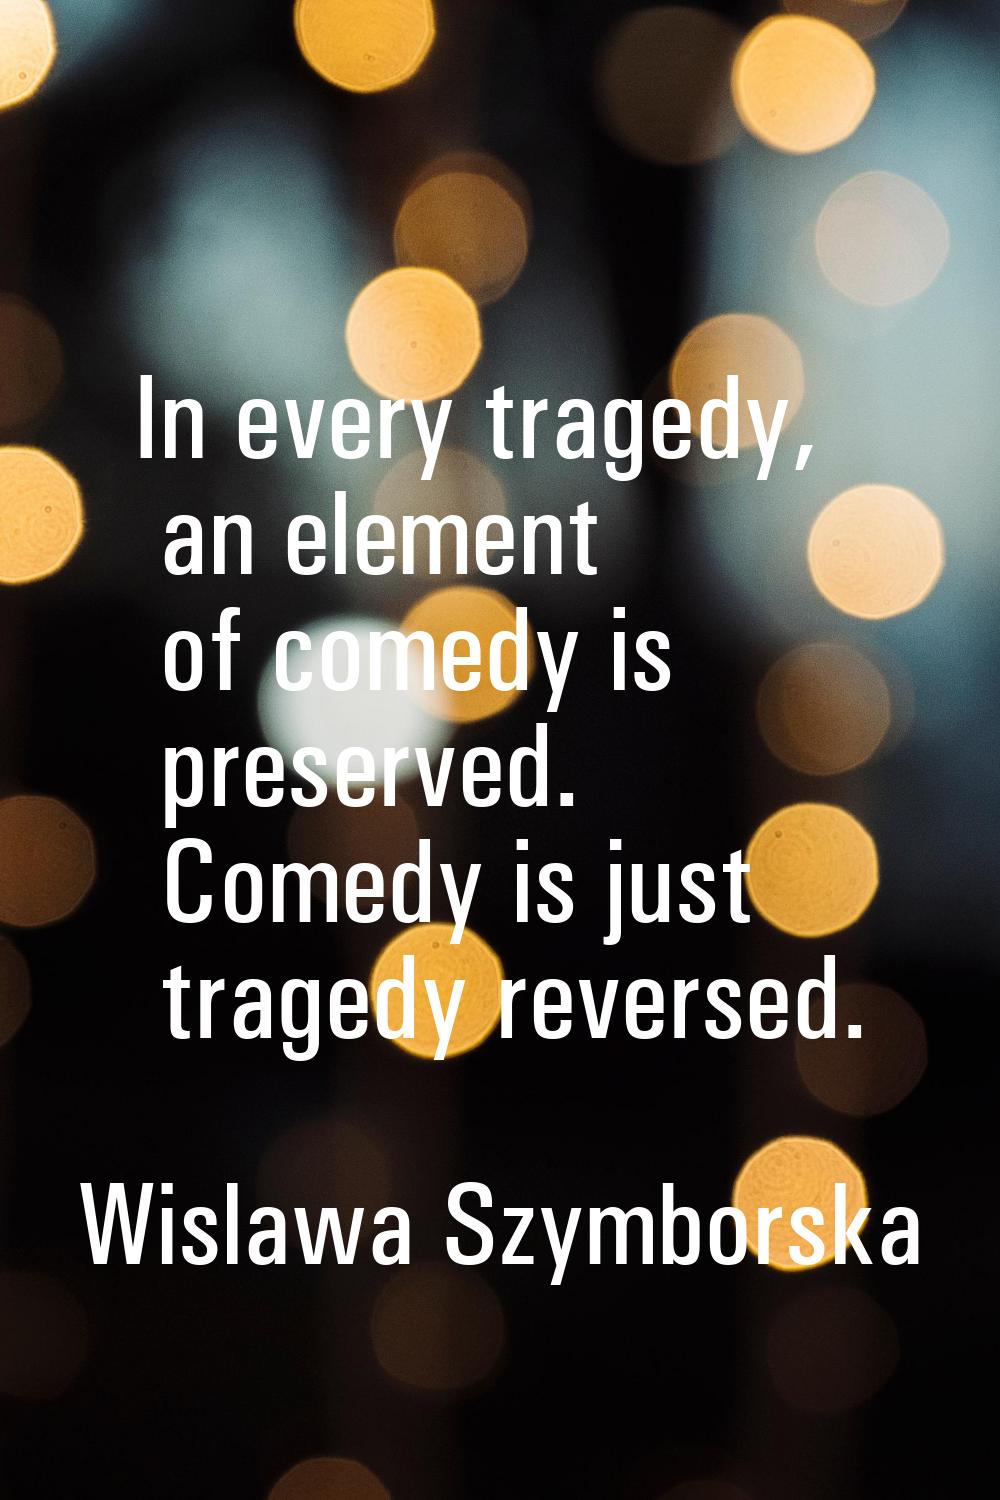 In every tragedy, an element of comedy is preserved. Comedy is just tragedy reversed.